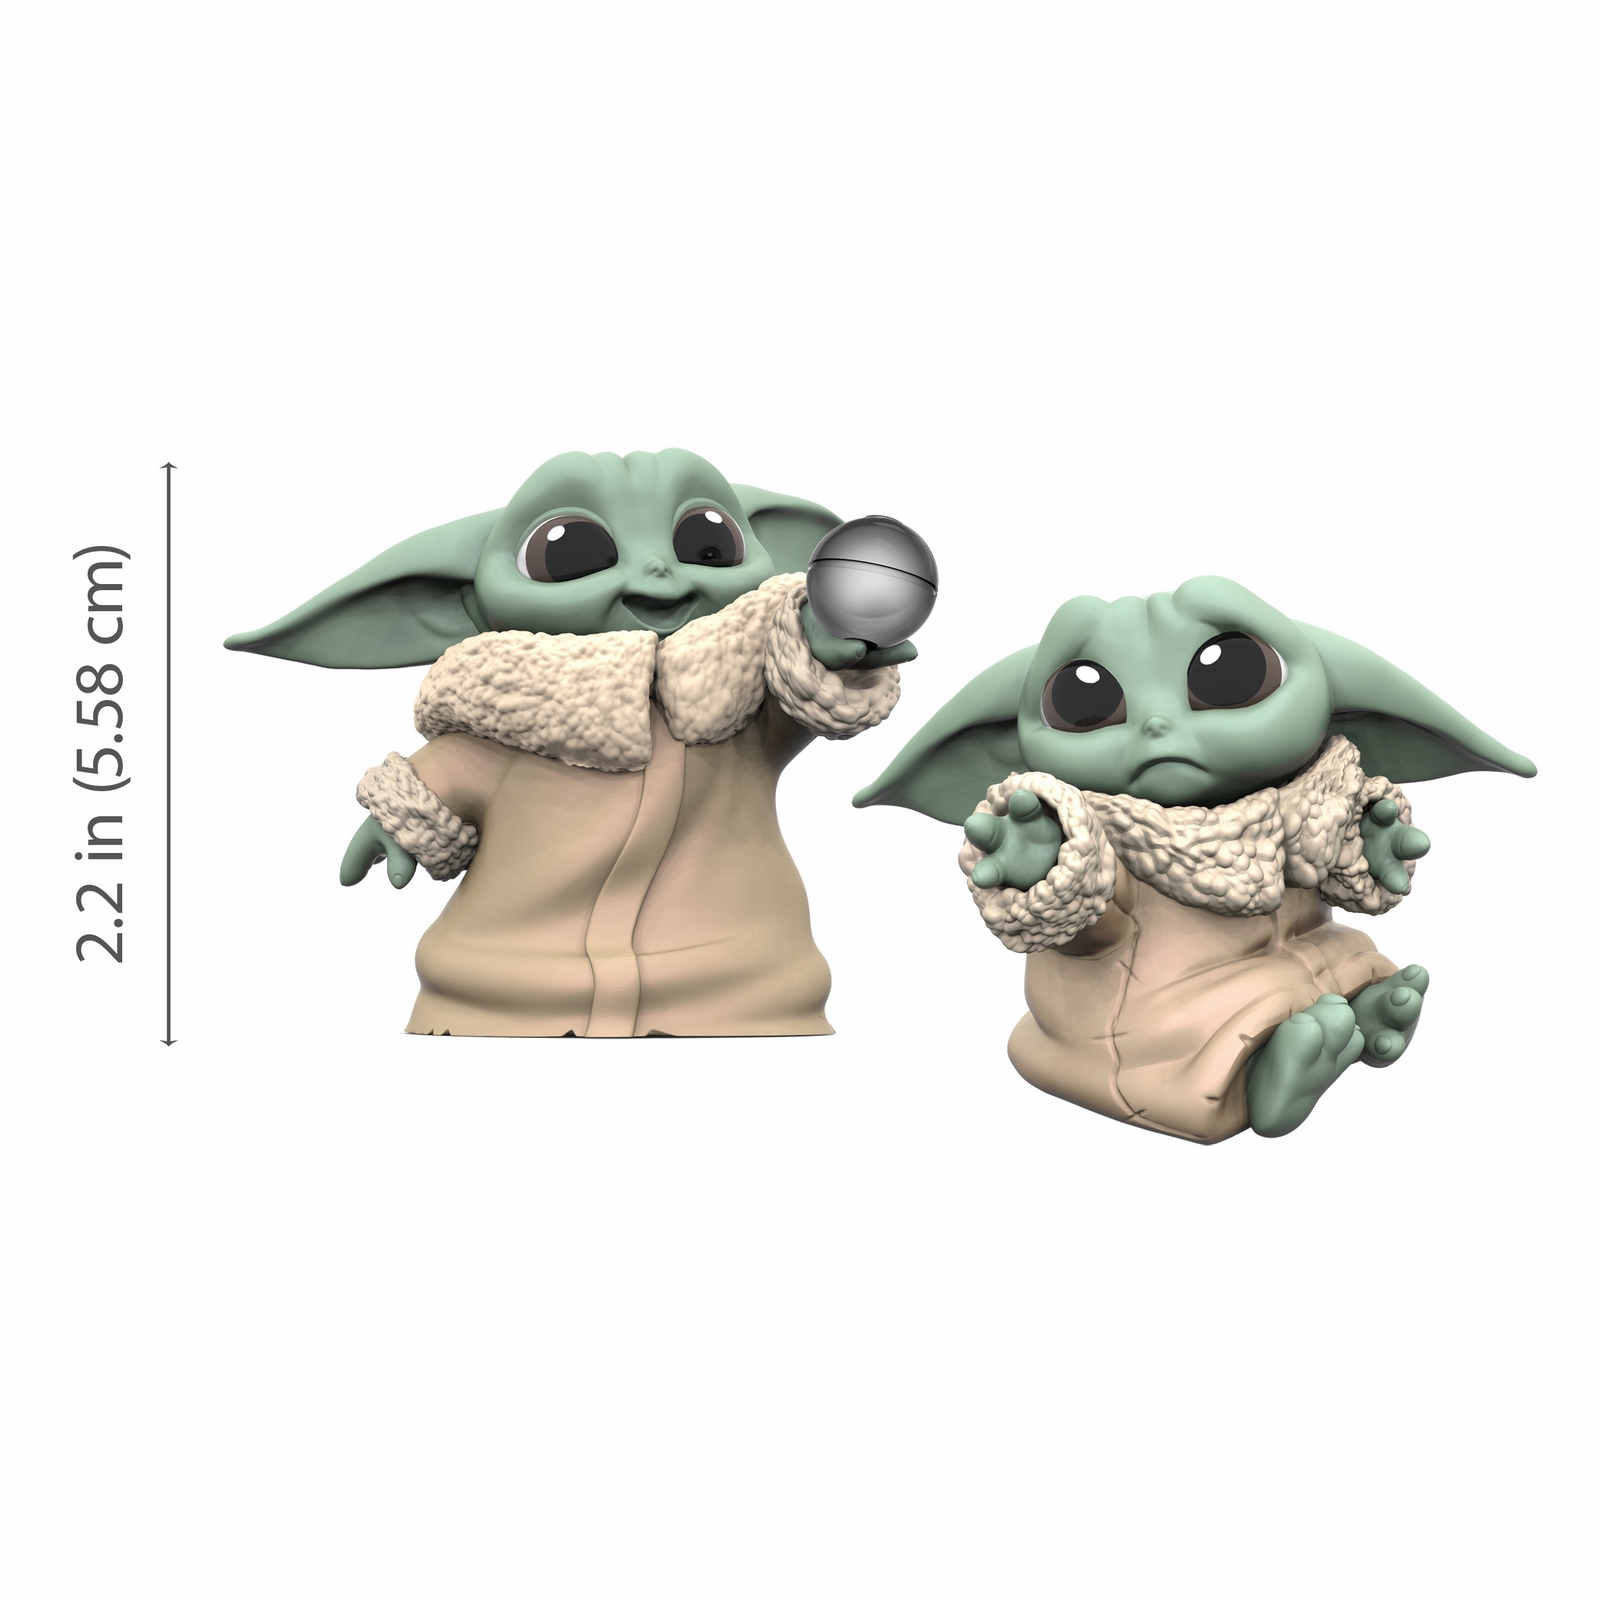 STAR WARS THE BOUNTY COLLECTION, THE CHILD 2.2-inch Collectibles (3).jpg